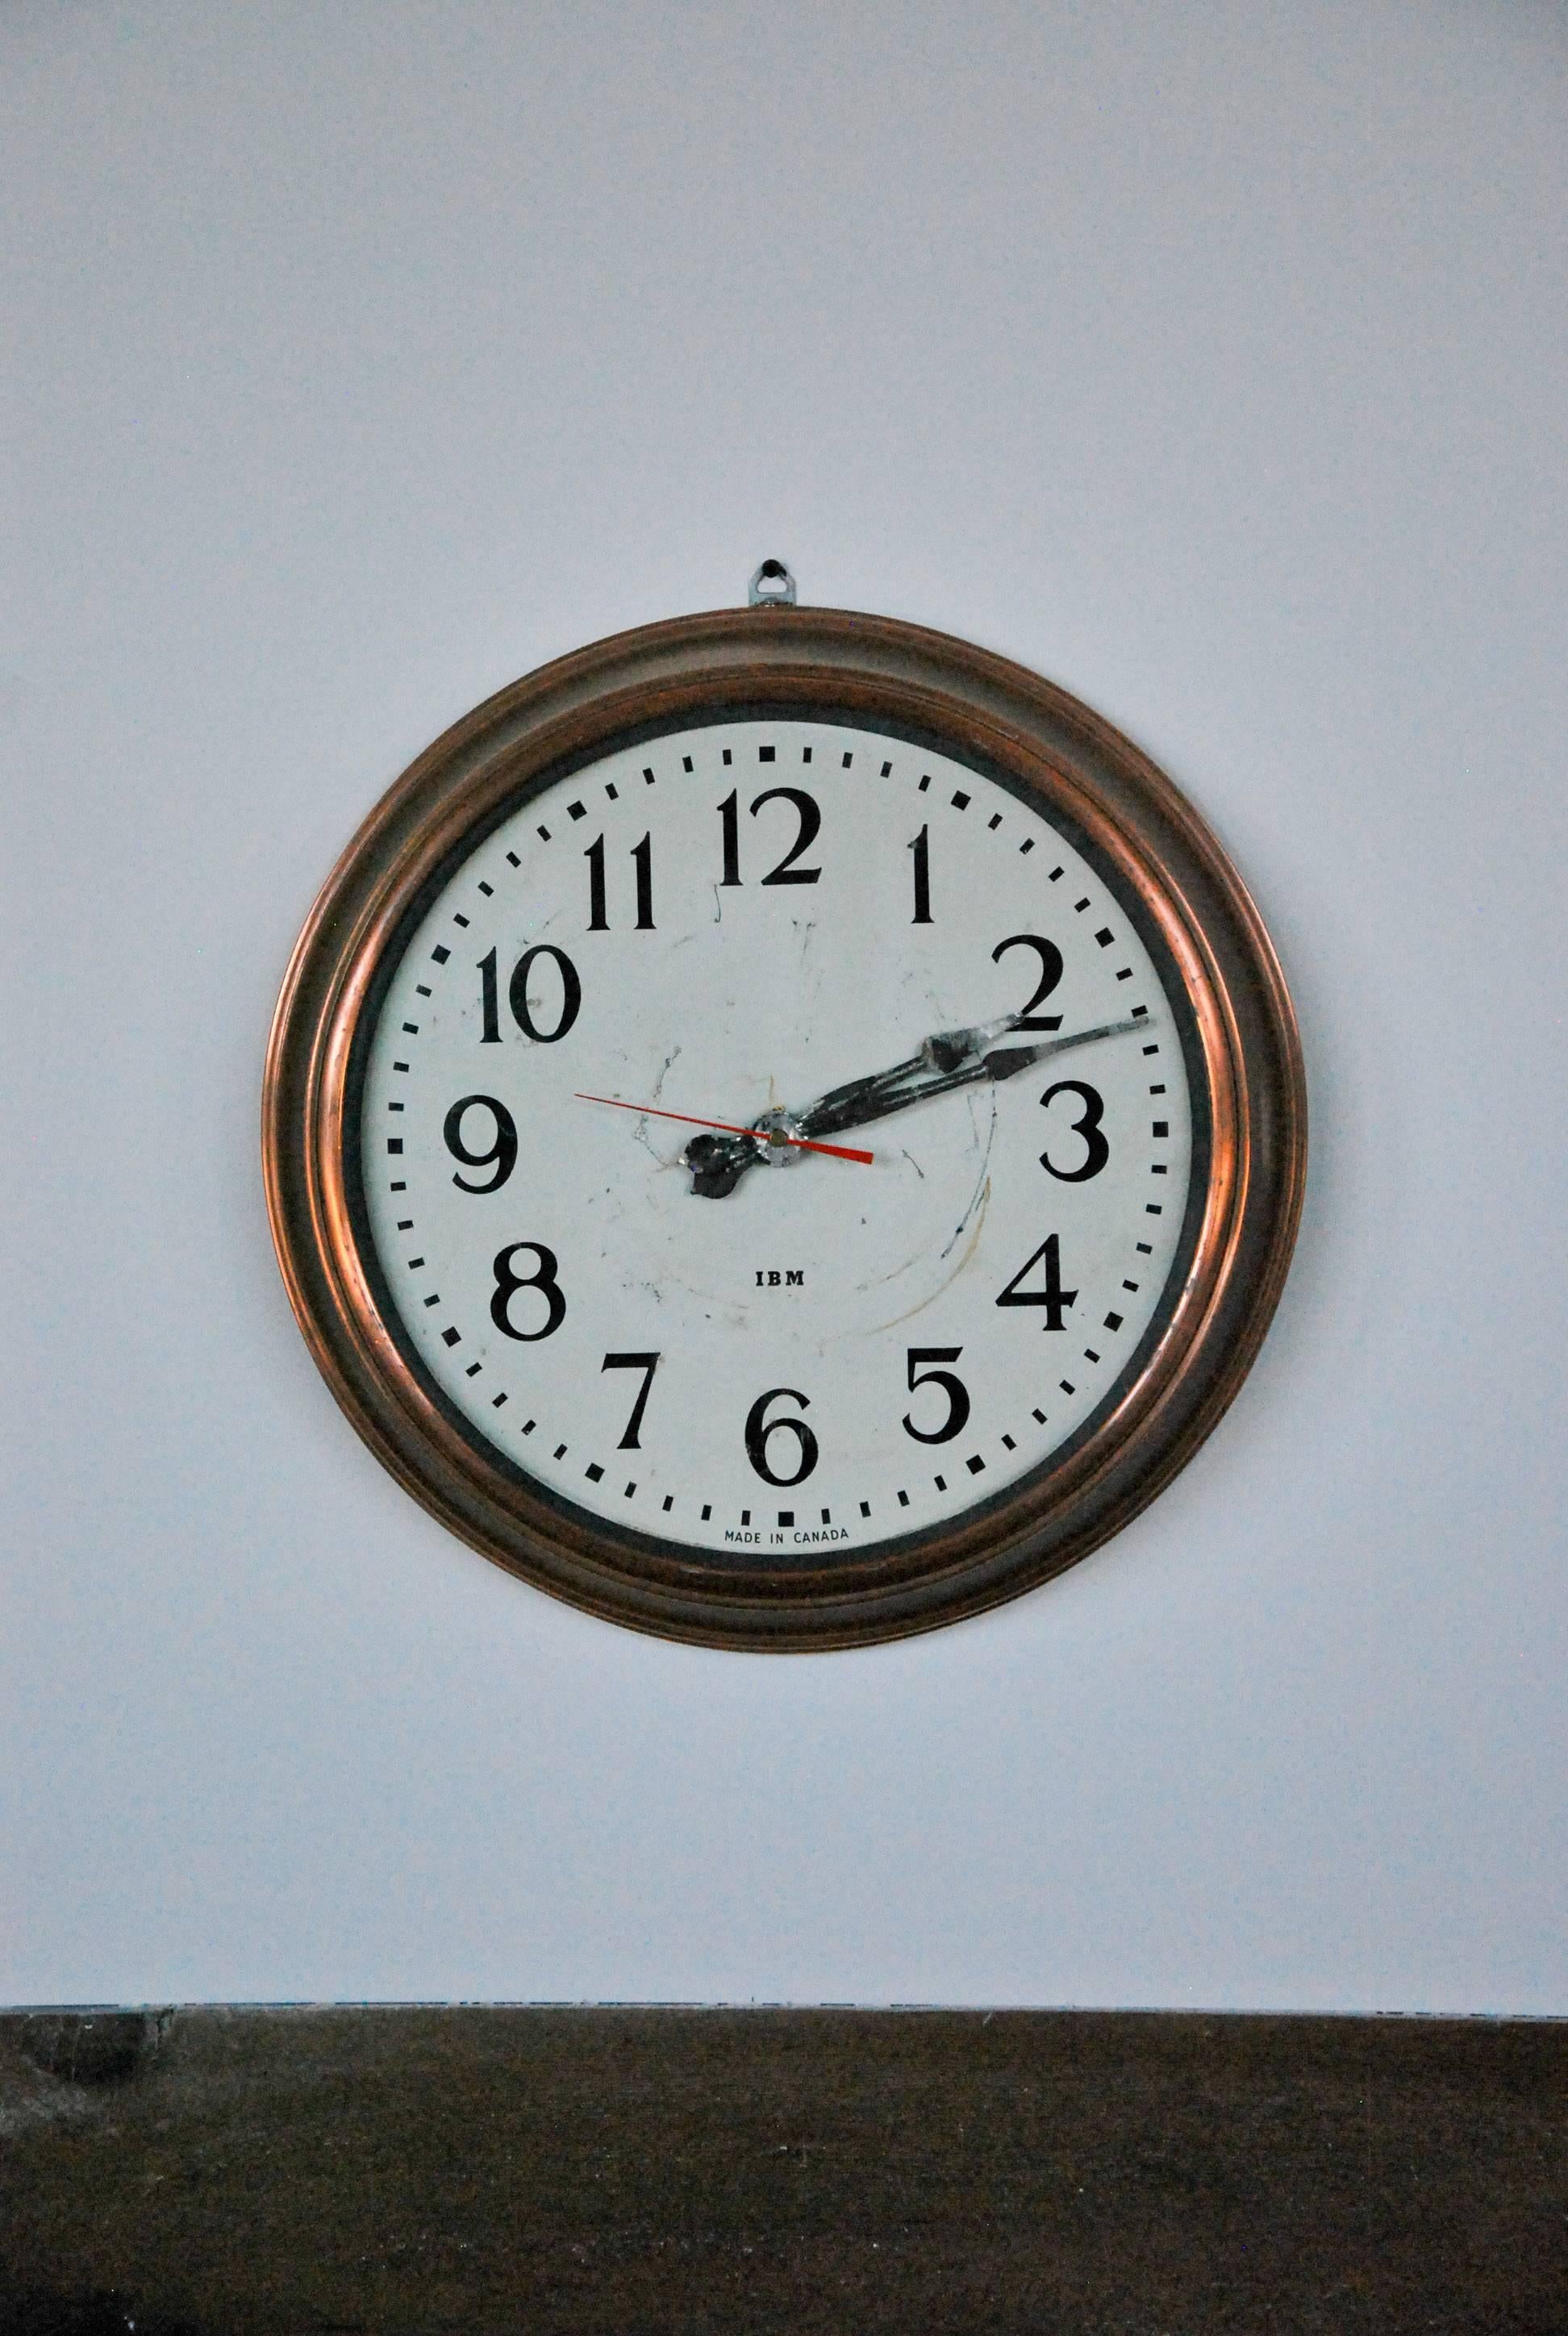 We have three original clocks with original factory finish in slate grey. The copper material is under this removable color. Example shown. The inner workings have been retrofitted to accommodate a simple battery for easy mounting and maintenance.